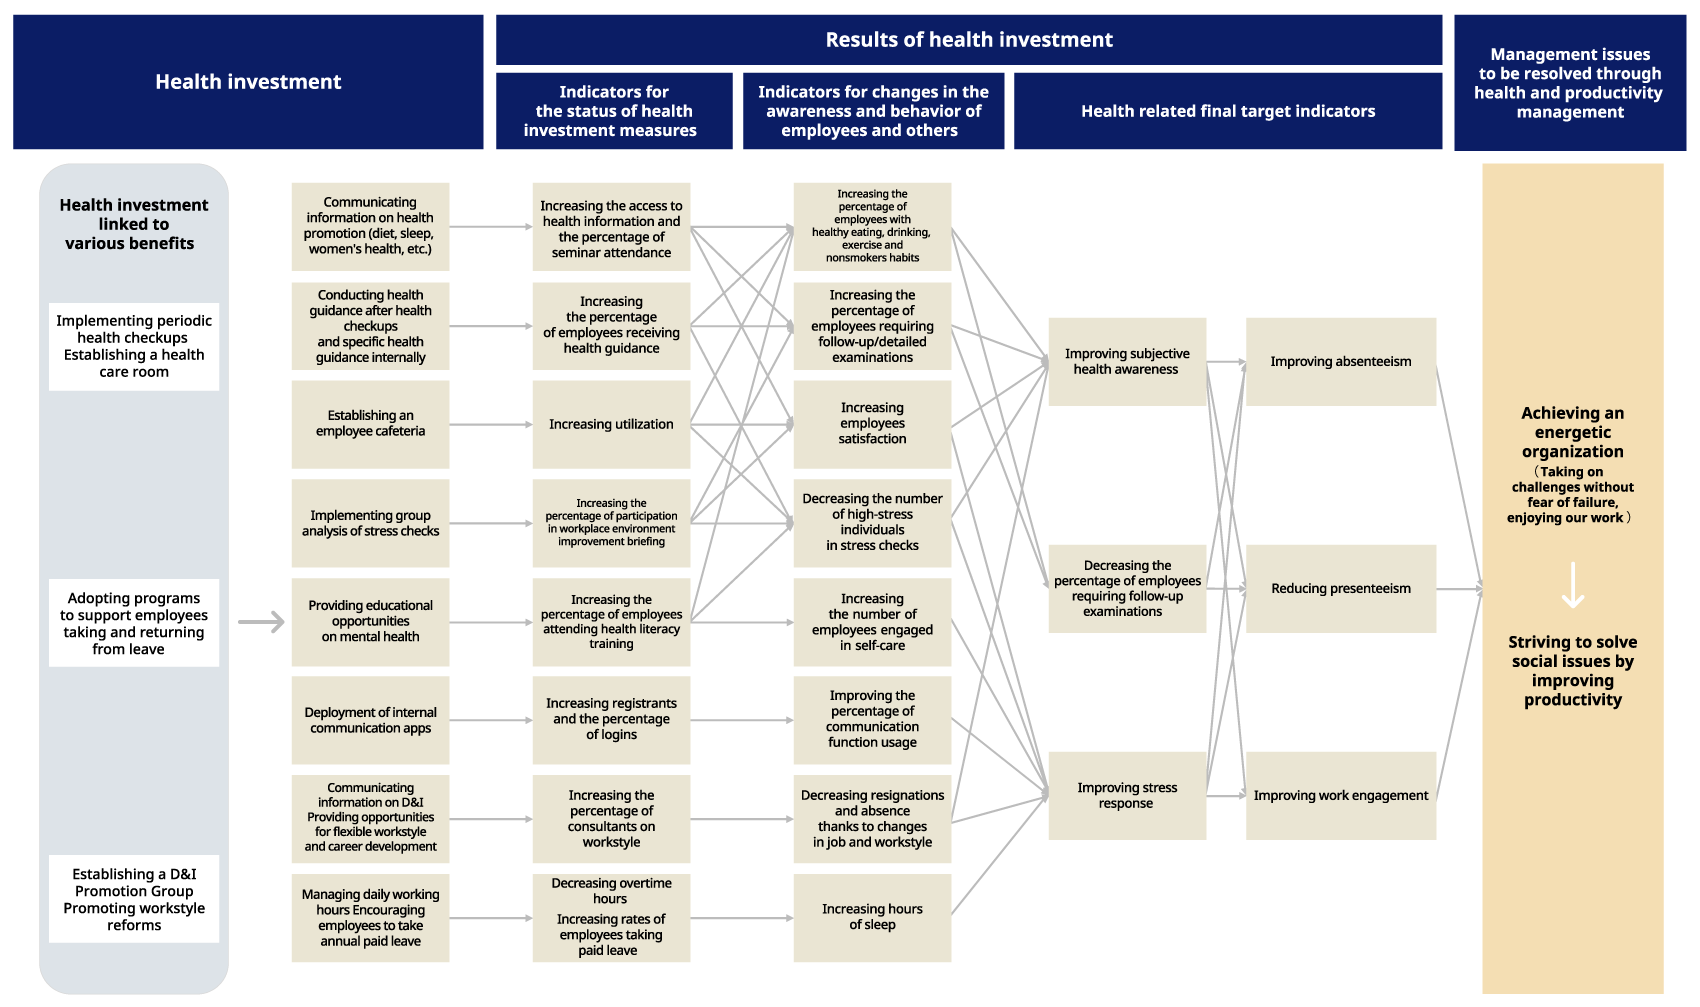 S-Pool Group health and productivity management strategy roadmap